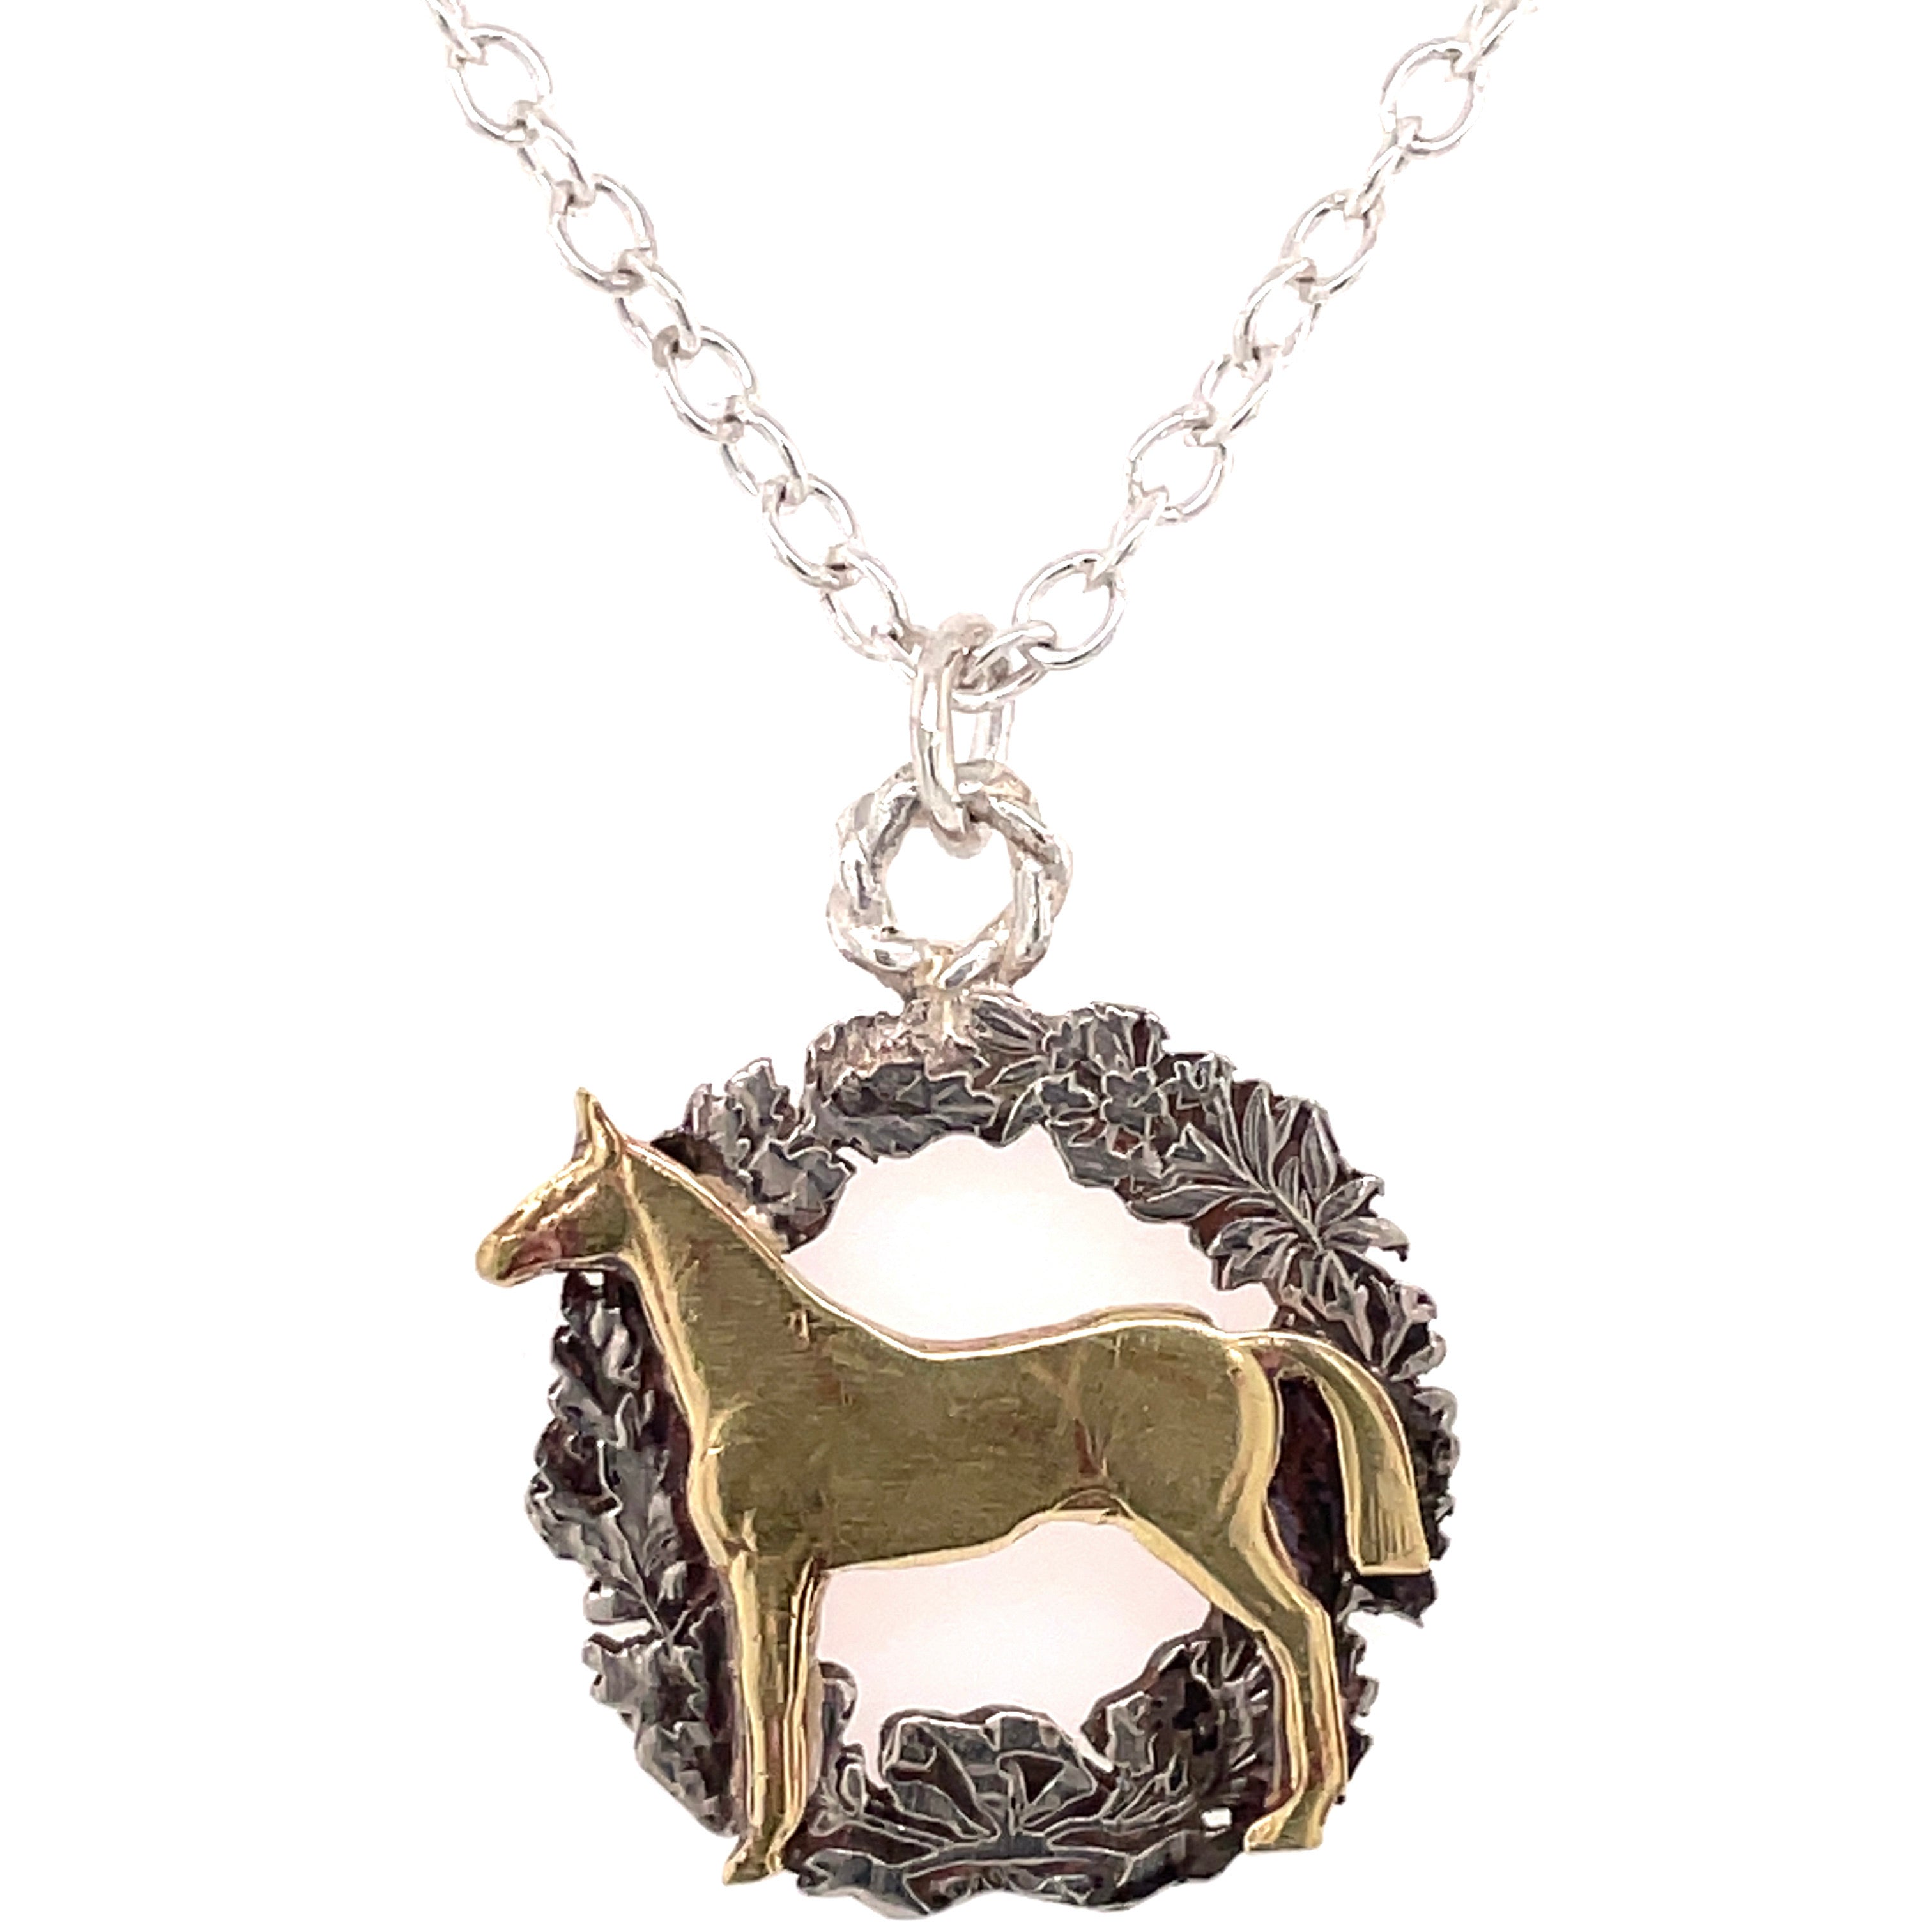 Horse coin necklace with silver chain